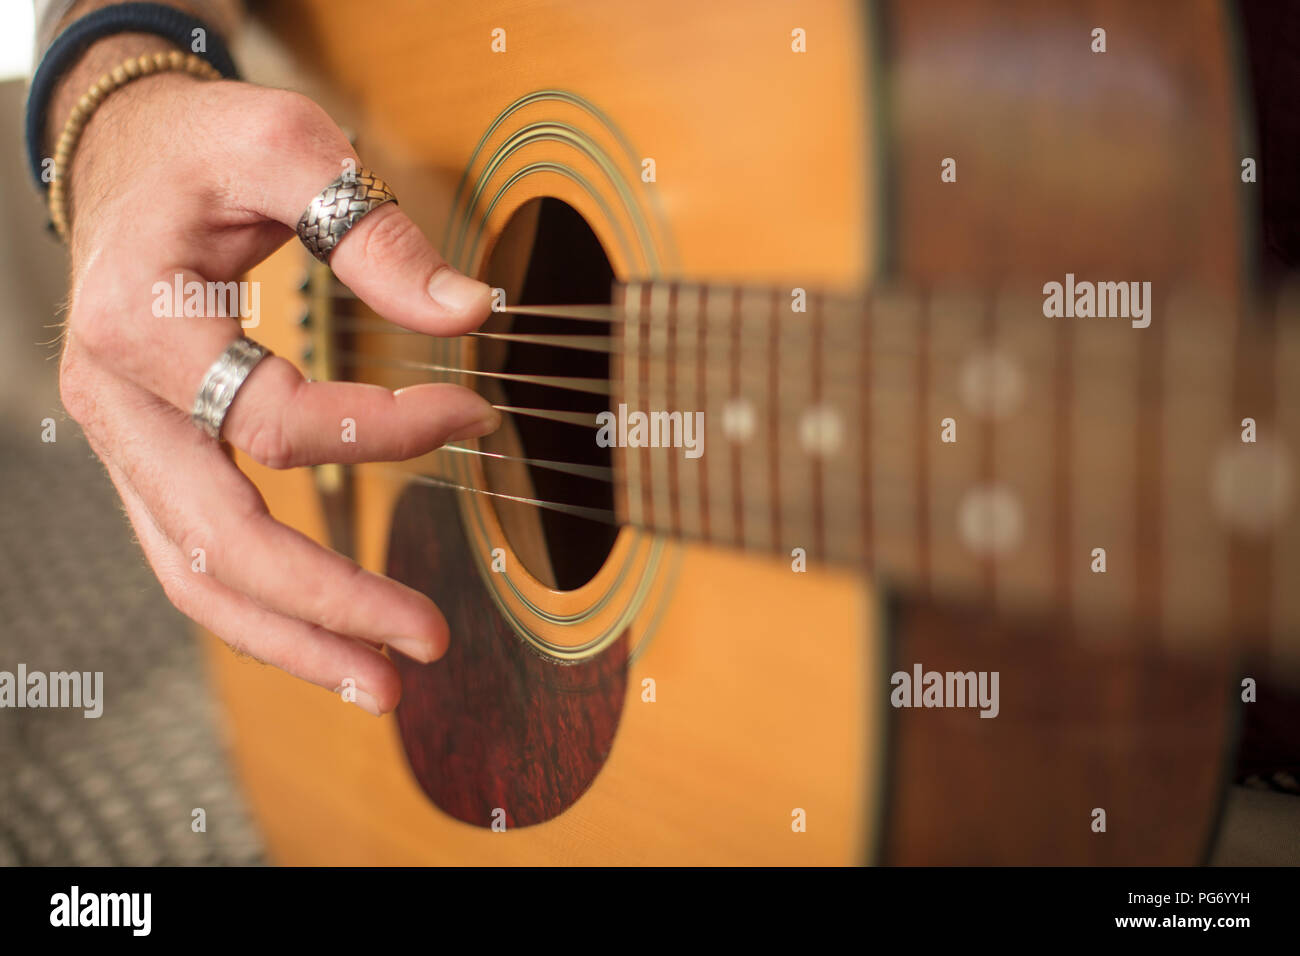 Close-up of man's hand playing guitar Stock Photo